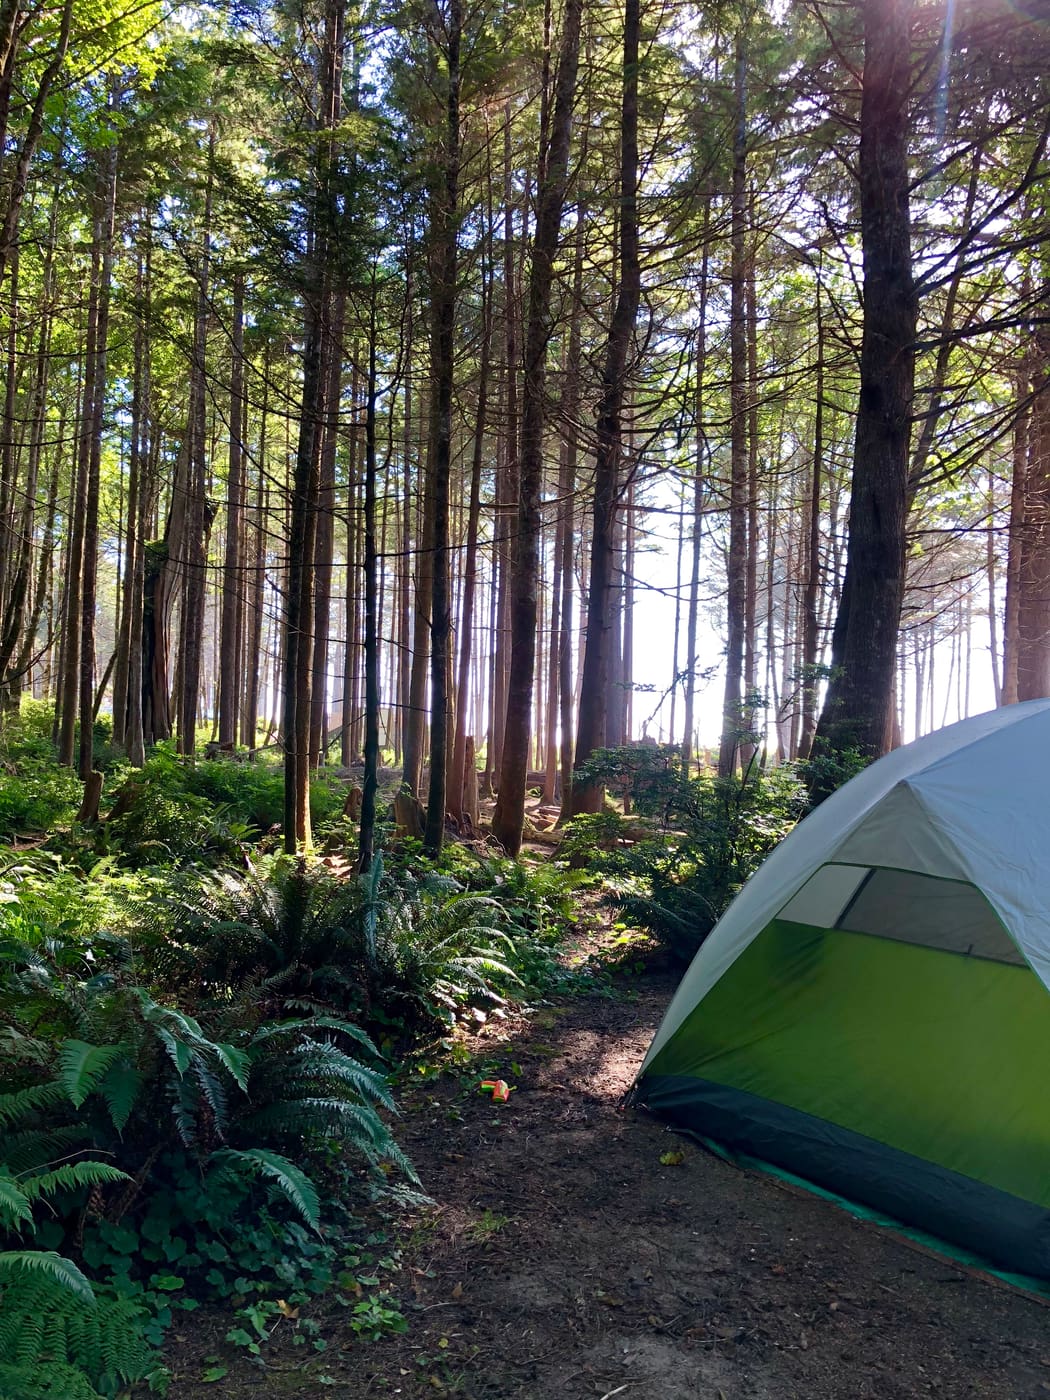 Green tent set up in a coastal forest.